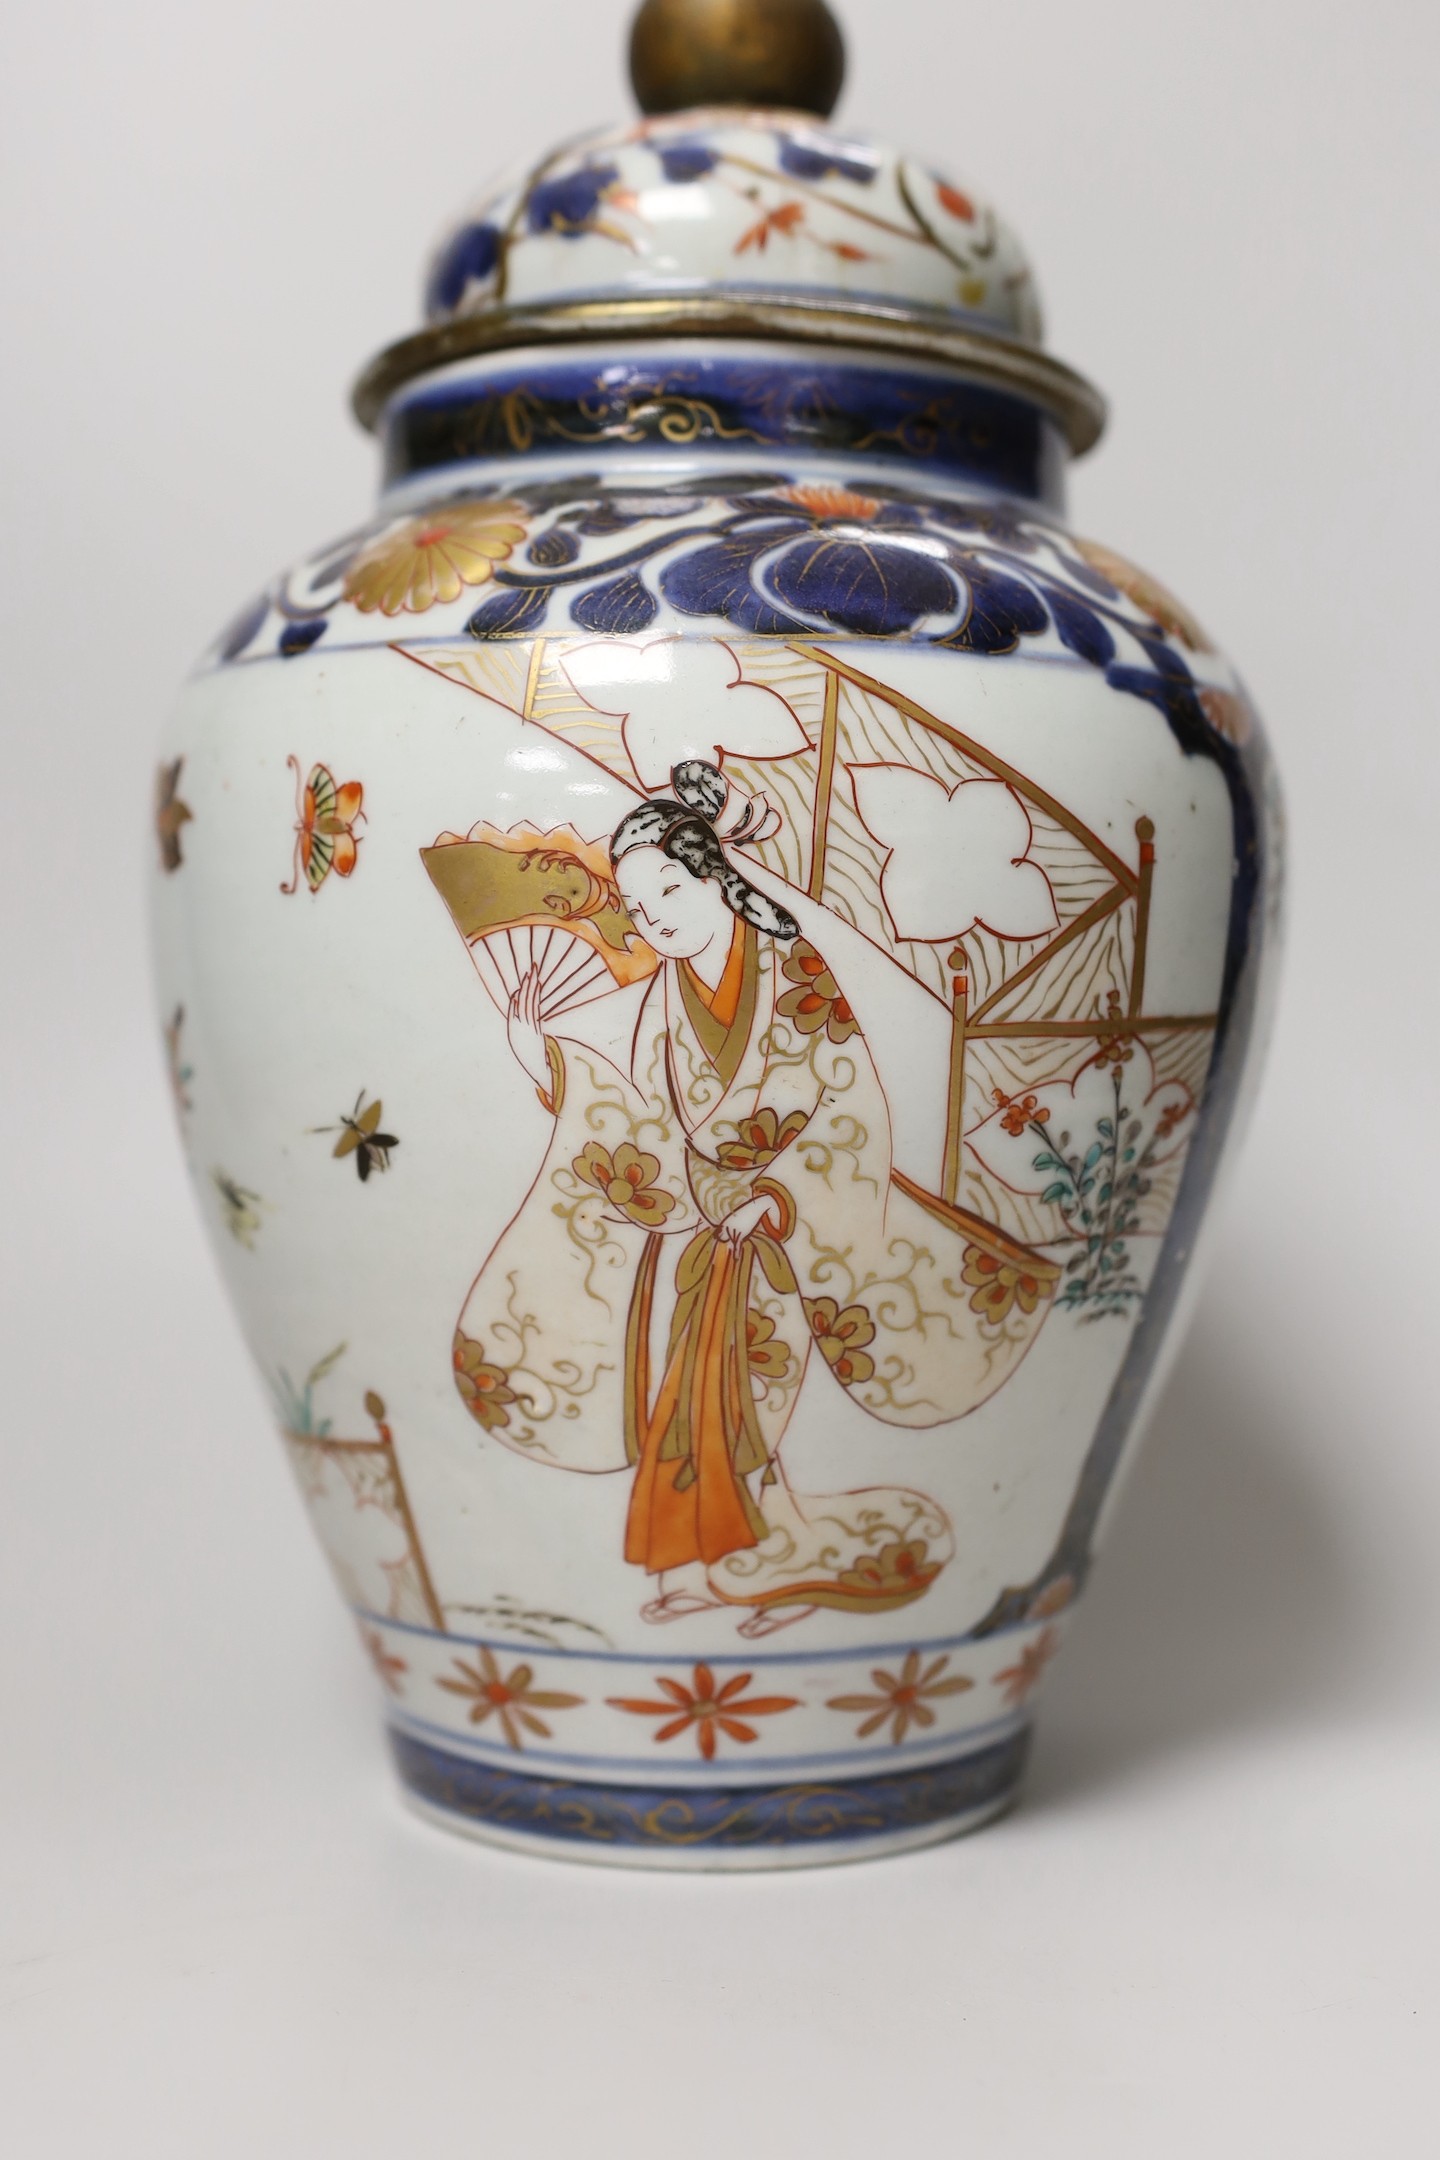 A late 17th/early 18th century Japanese Arita vase and cover, 27cm